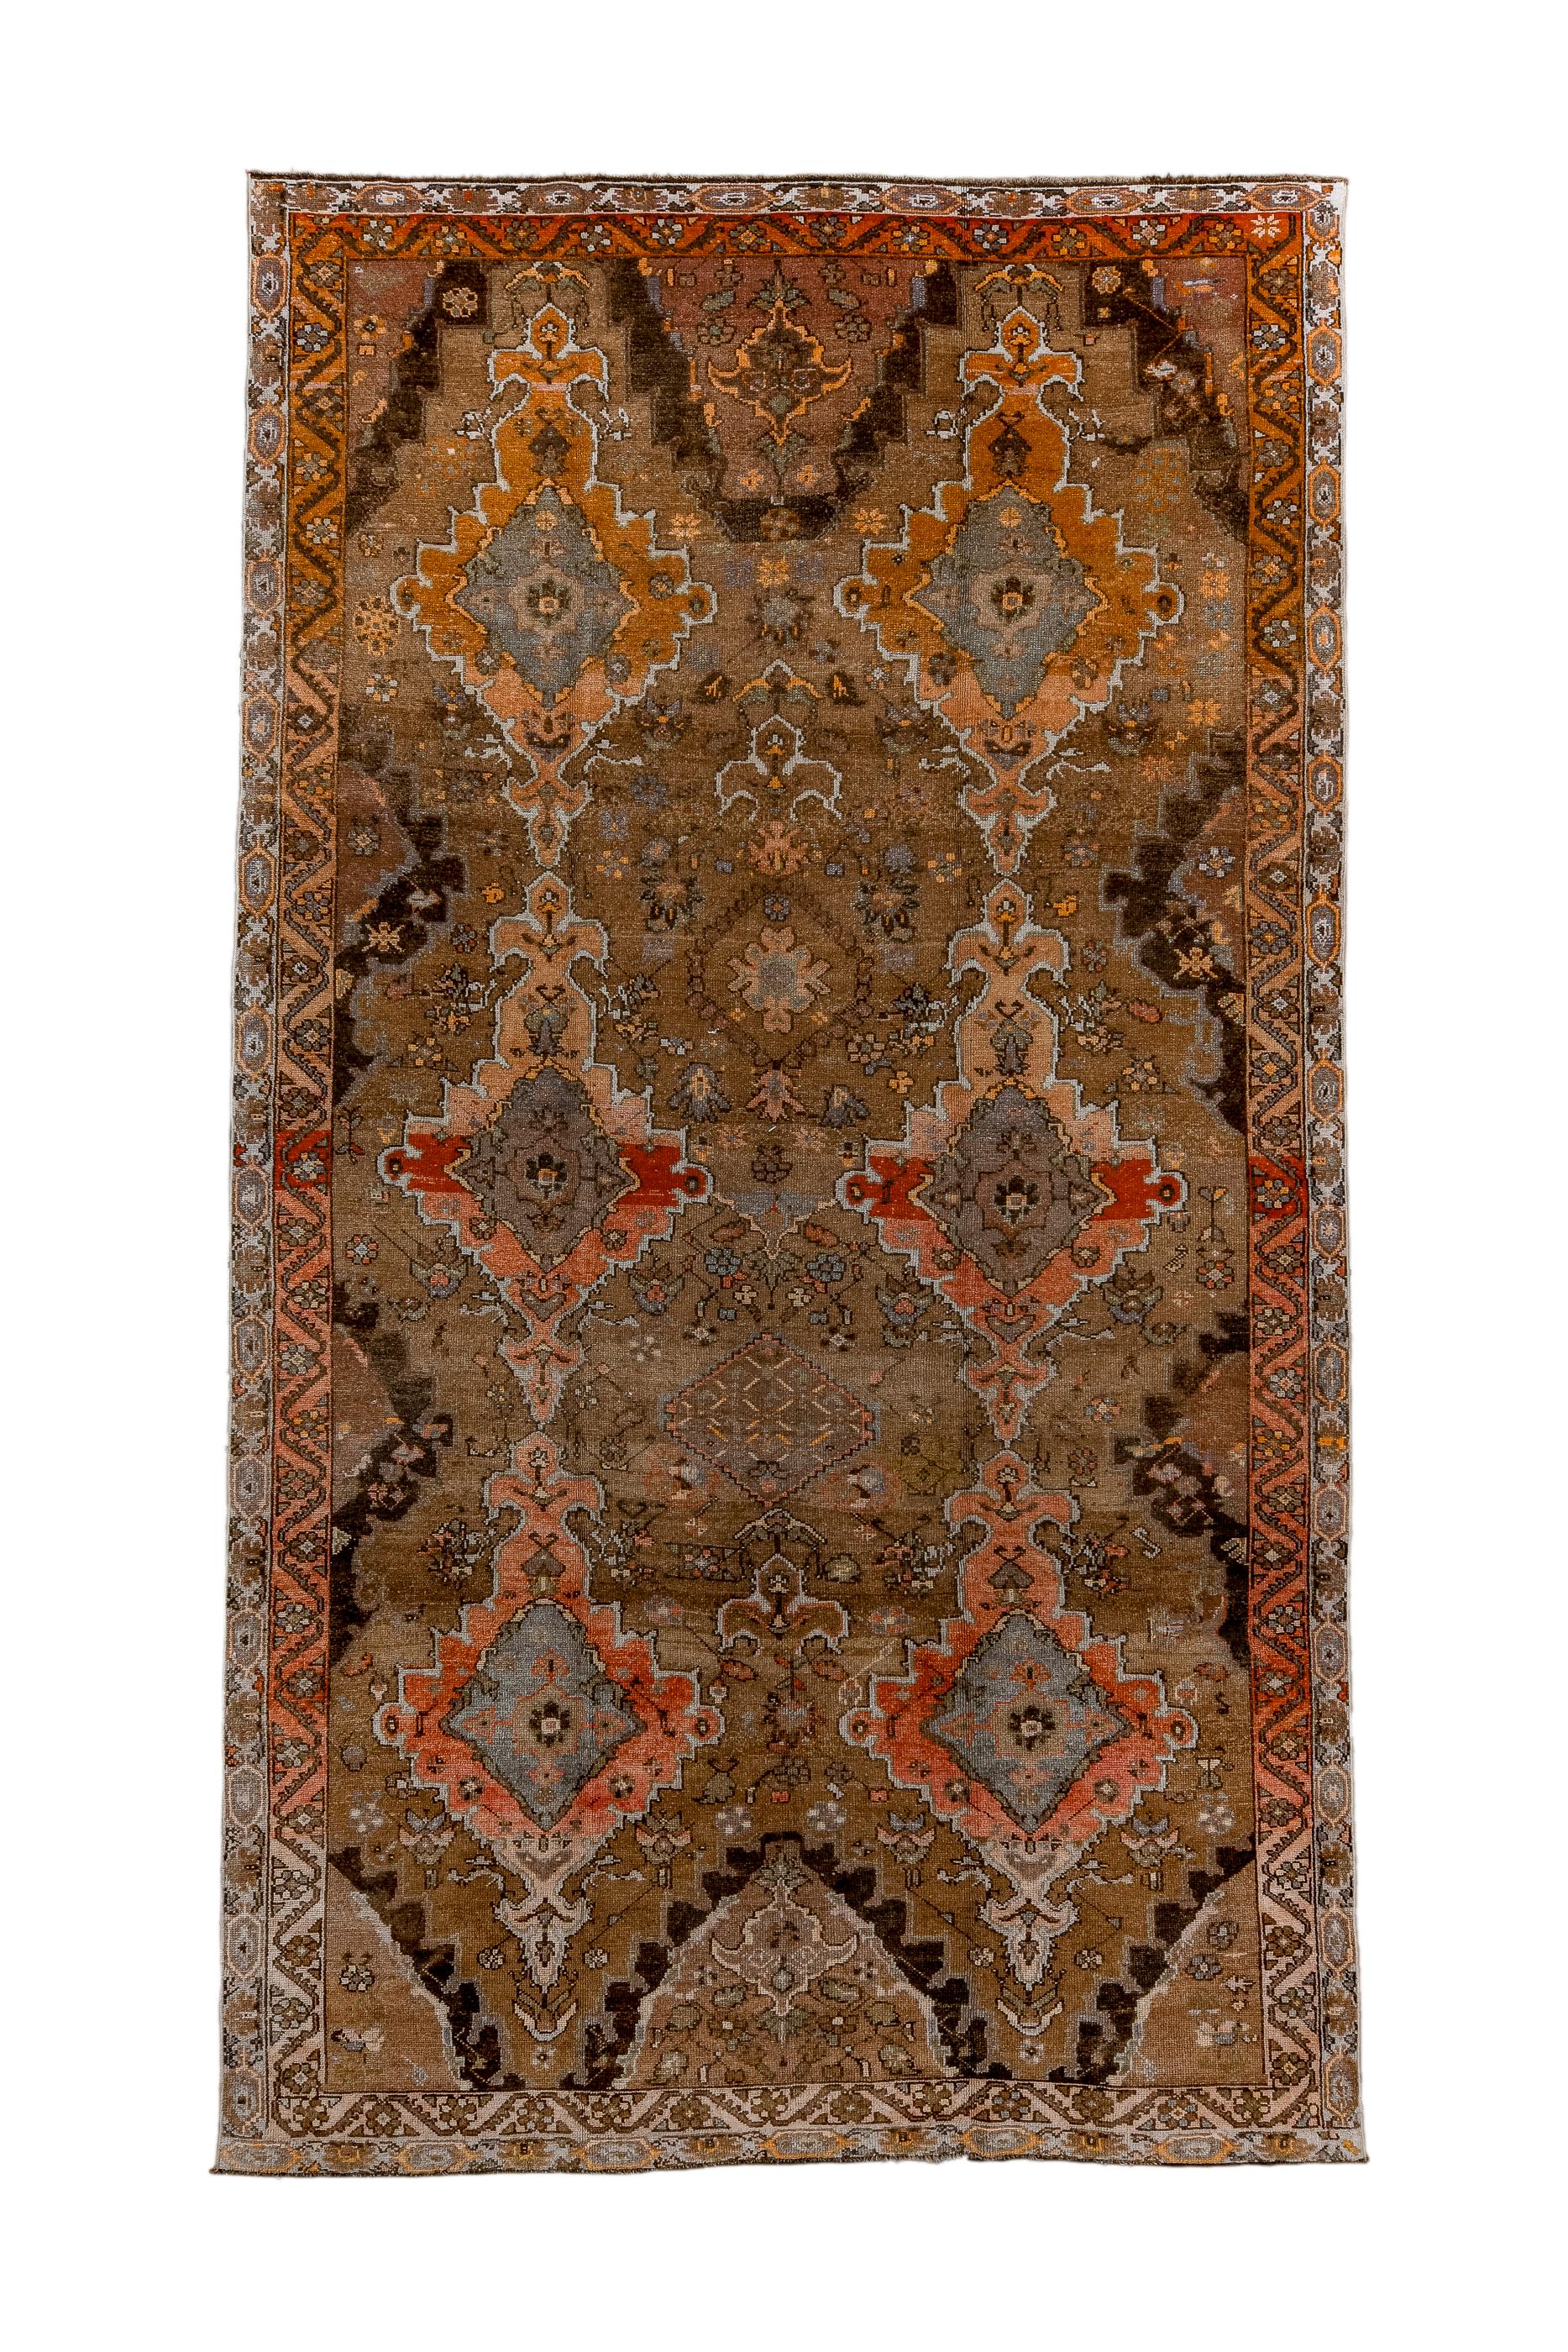 Very inventive carpet with a warm red field 

Rug Size
7x12'5